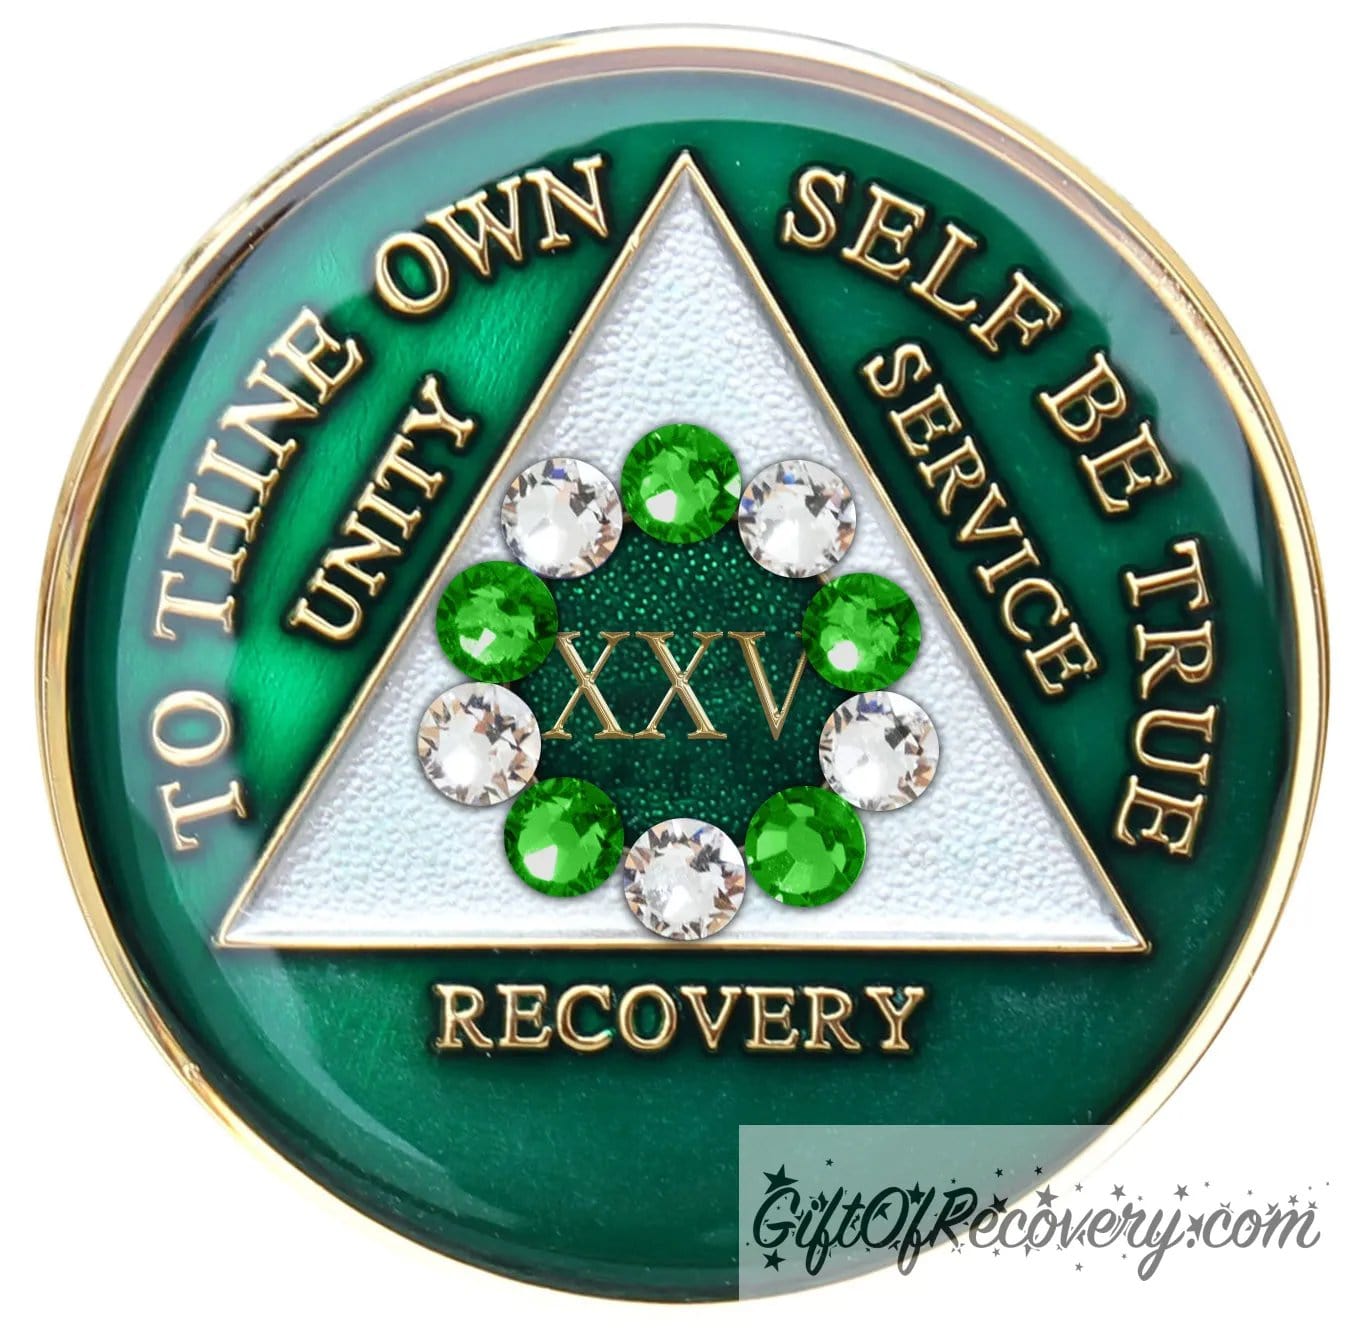 25 year emerald green AA medallion with the 10th step in emphasis in the center, 5 emerald green genuine crystals and 5 clear genuine crystals, inside the triangle is pearl white, while the circle is sparkle green. To thine own self be true, unity, service, recovery, and the roman numeral 1, are 14k gold and sealed with resin for a glossy finish.